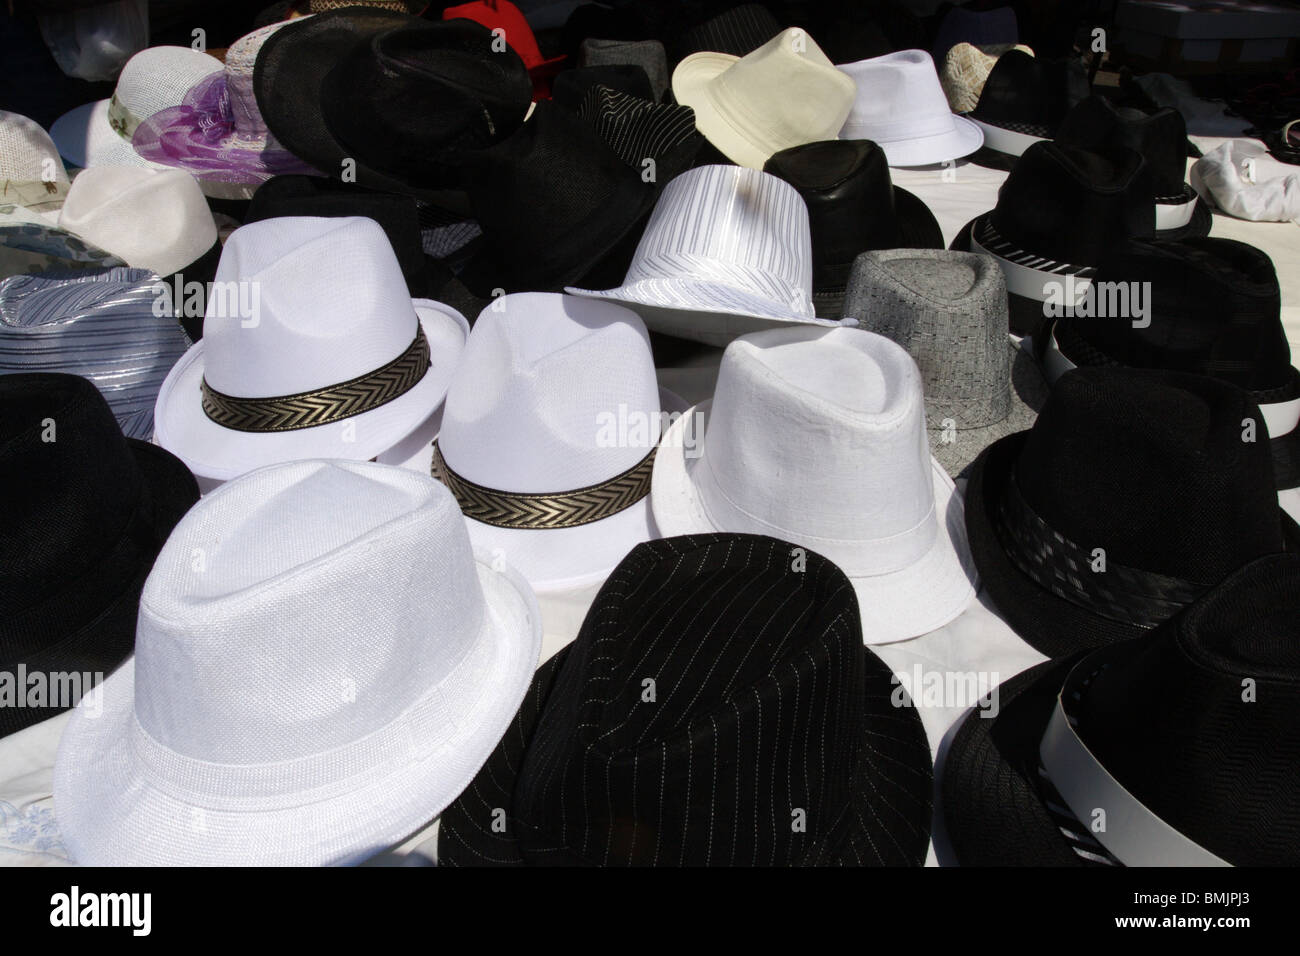 White Hats For Sales High Resolution Stock Photography and Images - Alamy